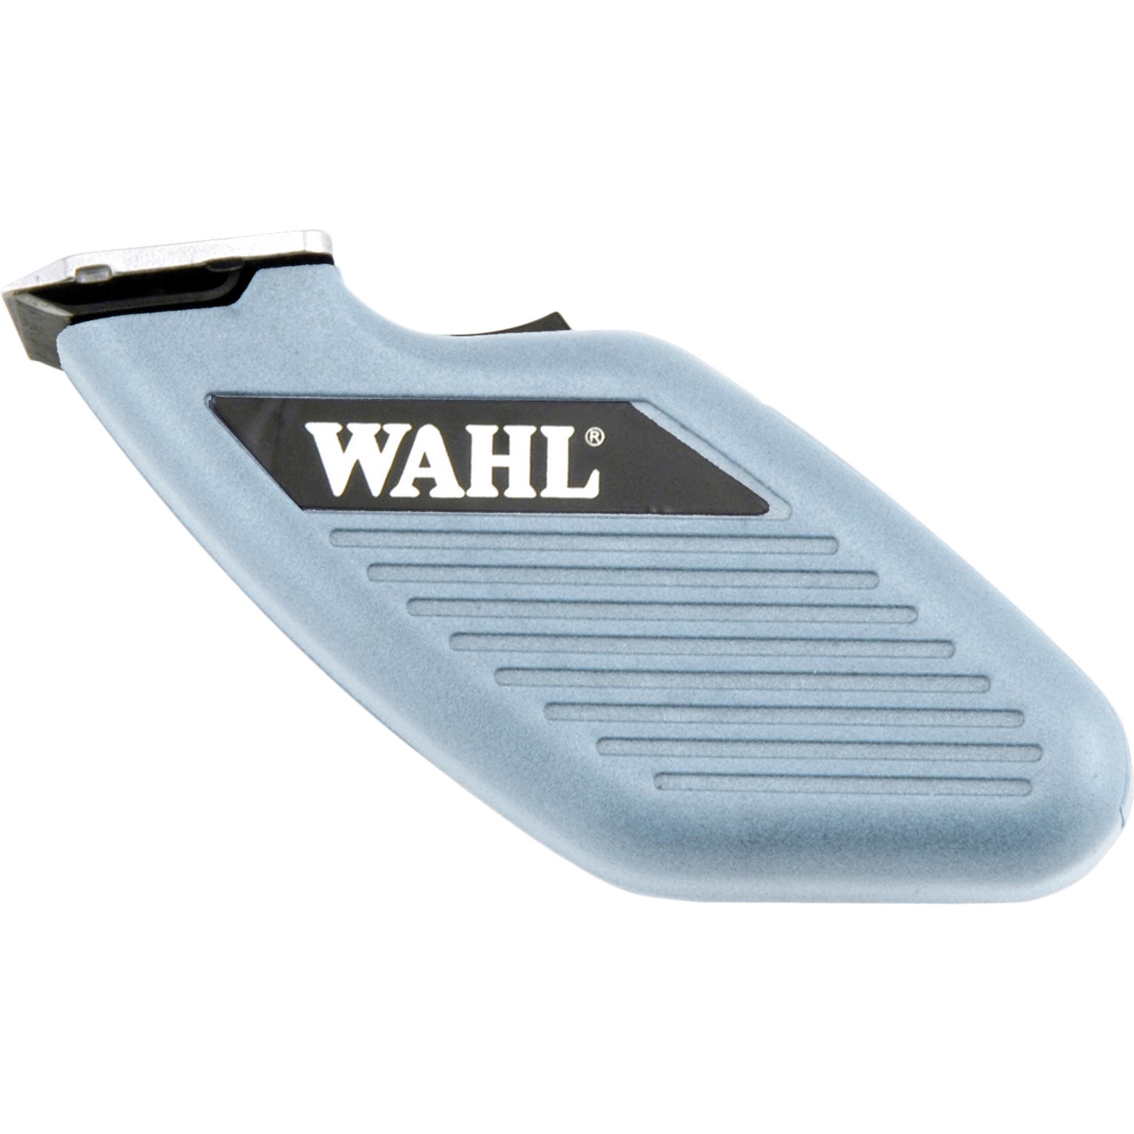 Wahl Pocket Pro Pet Clippers - Image 2 of 3